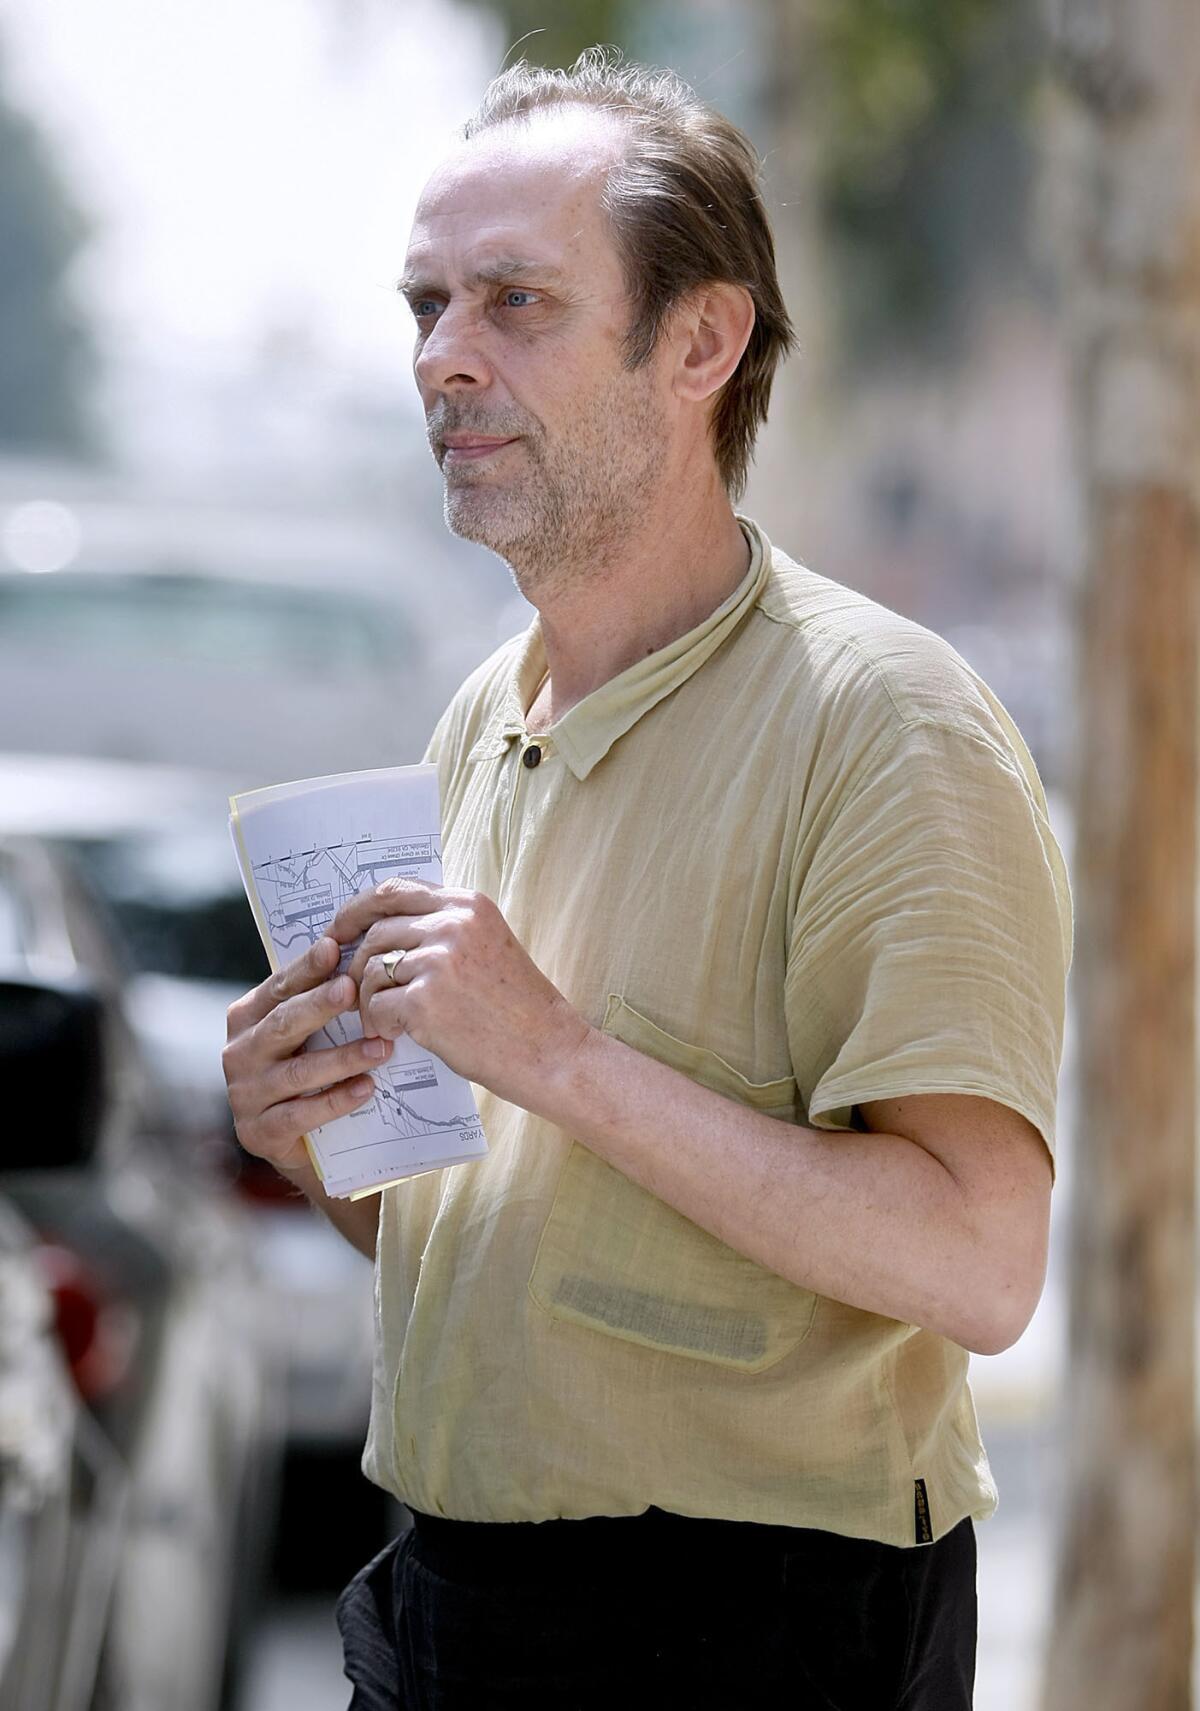 GothÃ‚Â¿rocker Peter Murphy holds paperwork as he comes out of the Glendale jail on Tuesday, March 19, 2013. The Bauhaus band lead singer spent the weekend in Jail after crashing his car into another one in Glendale on Saturday.